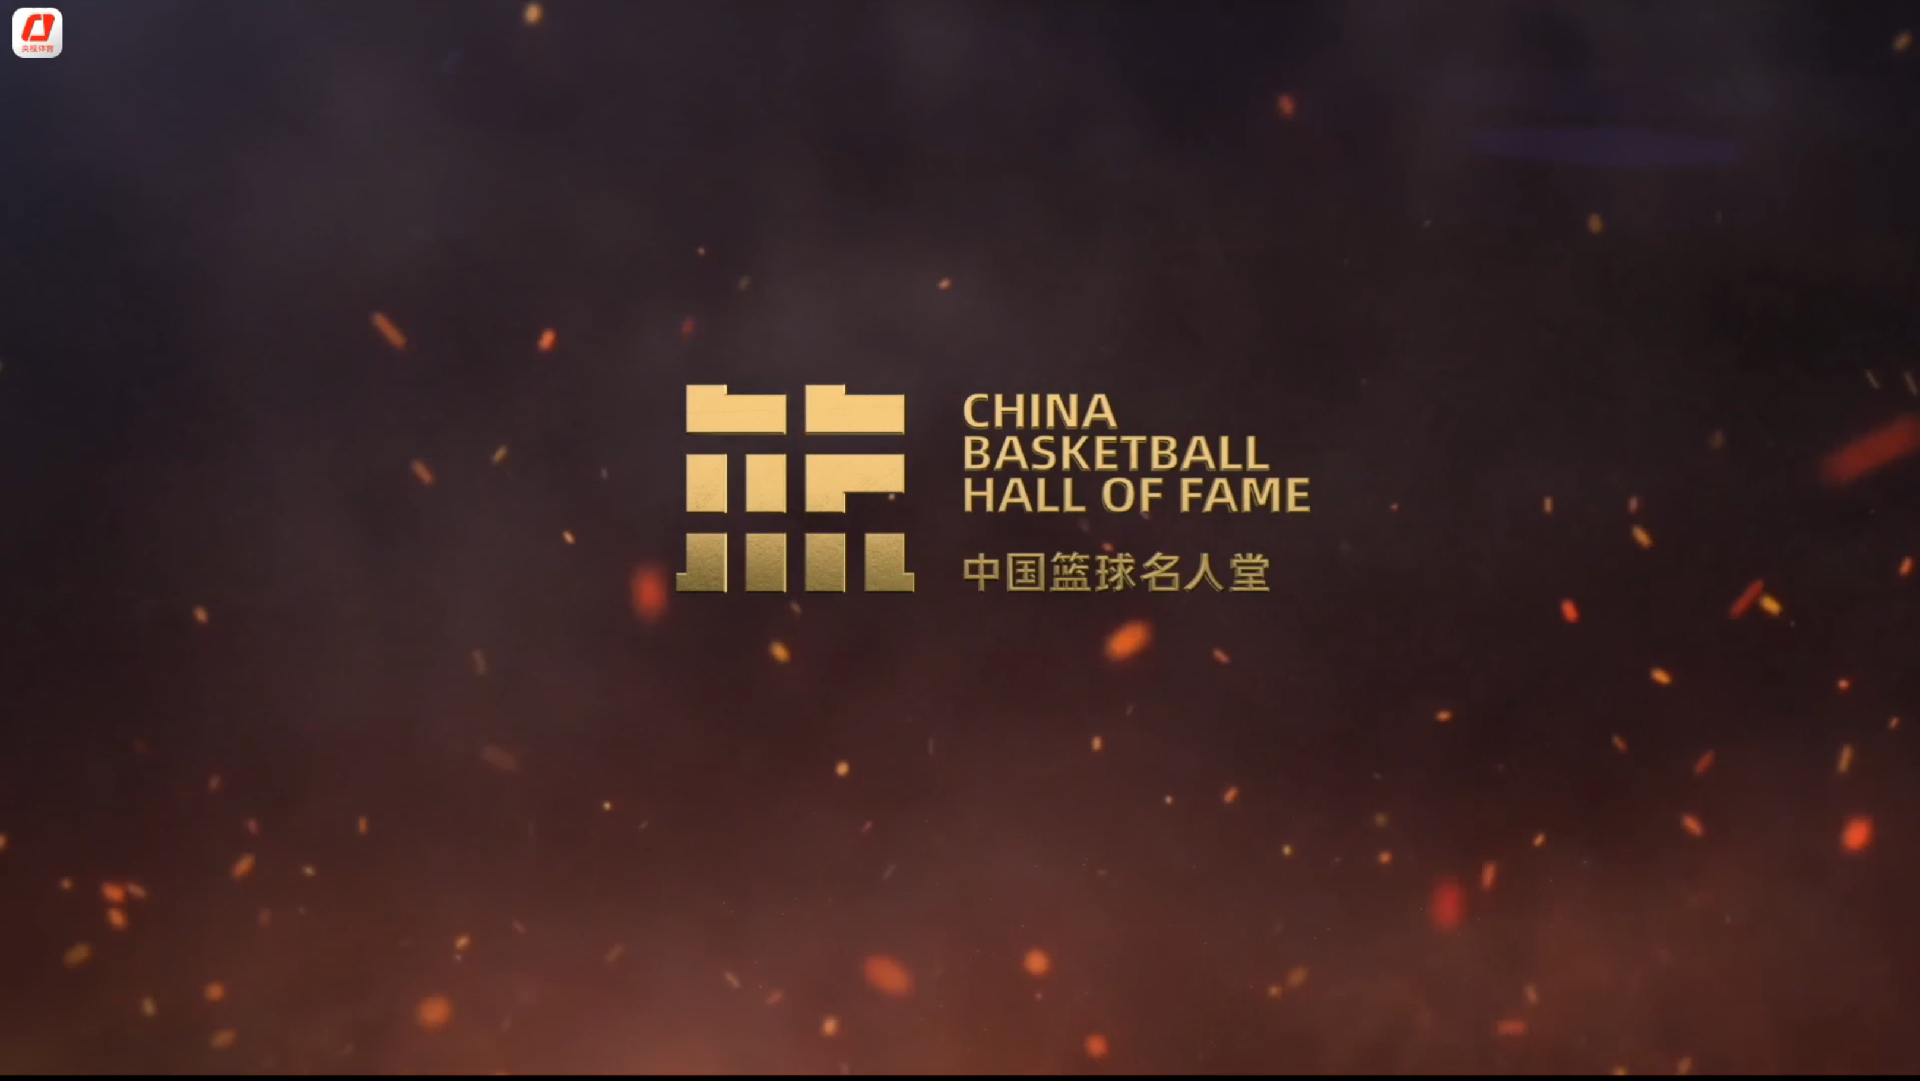 Nine legends enshrined as first class of China Basketball Hall of Fame